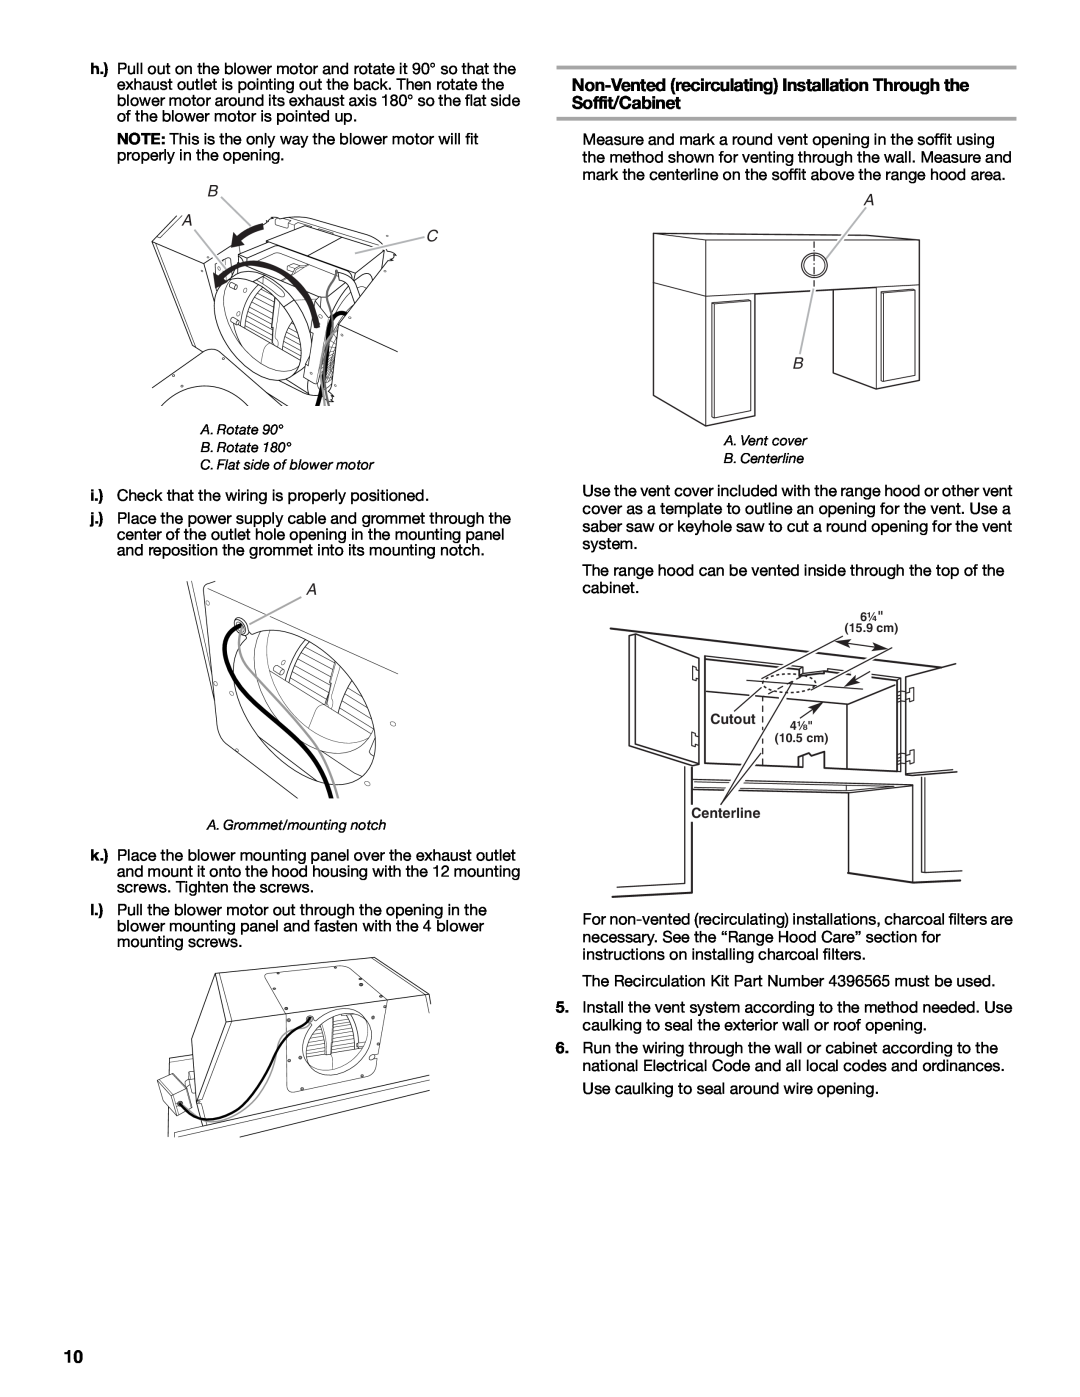 KitchenAid W10267109C installation instructions Non-Vented recirculating Installation Through the Soffit/Cabinet, B A C 